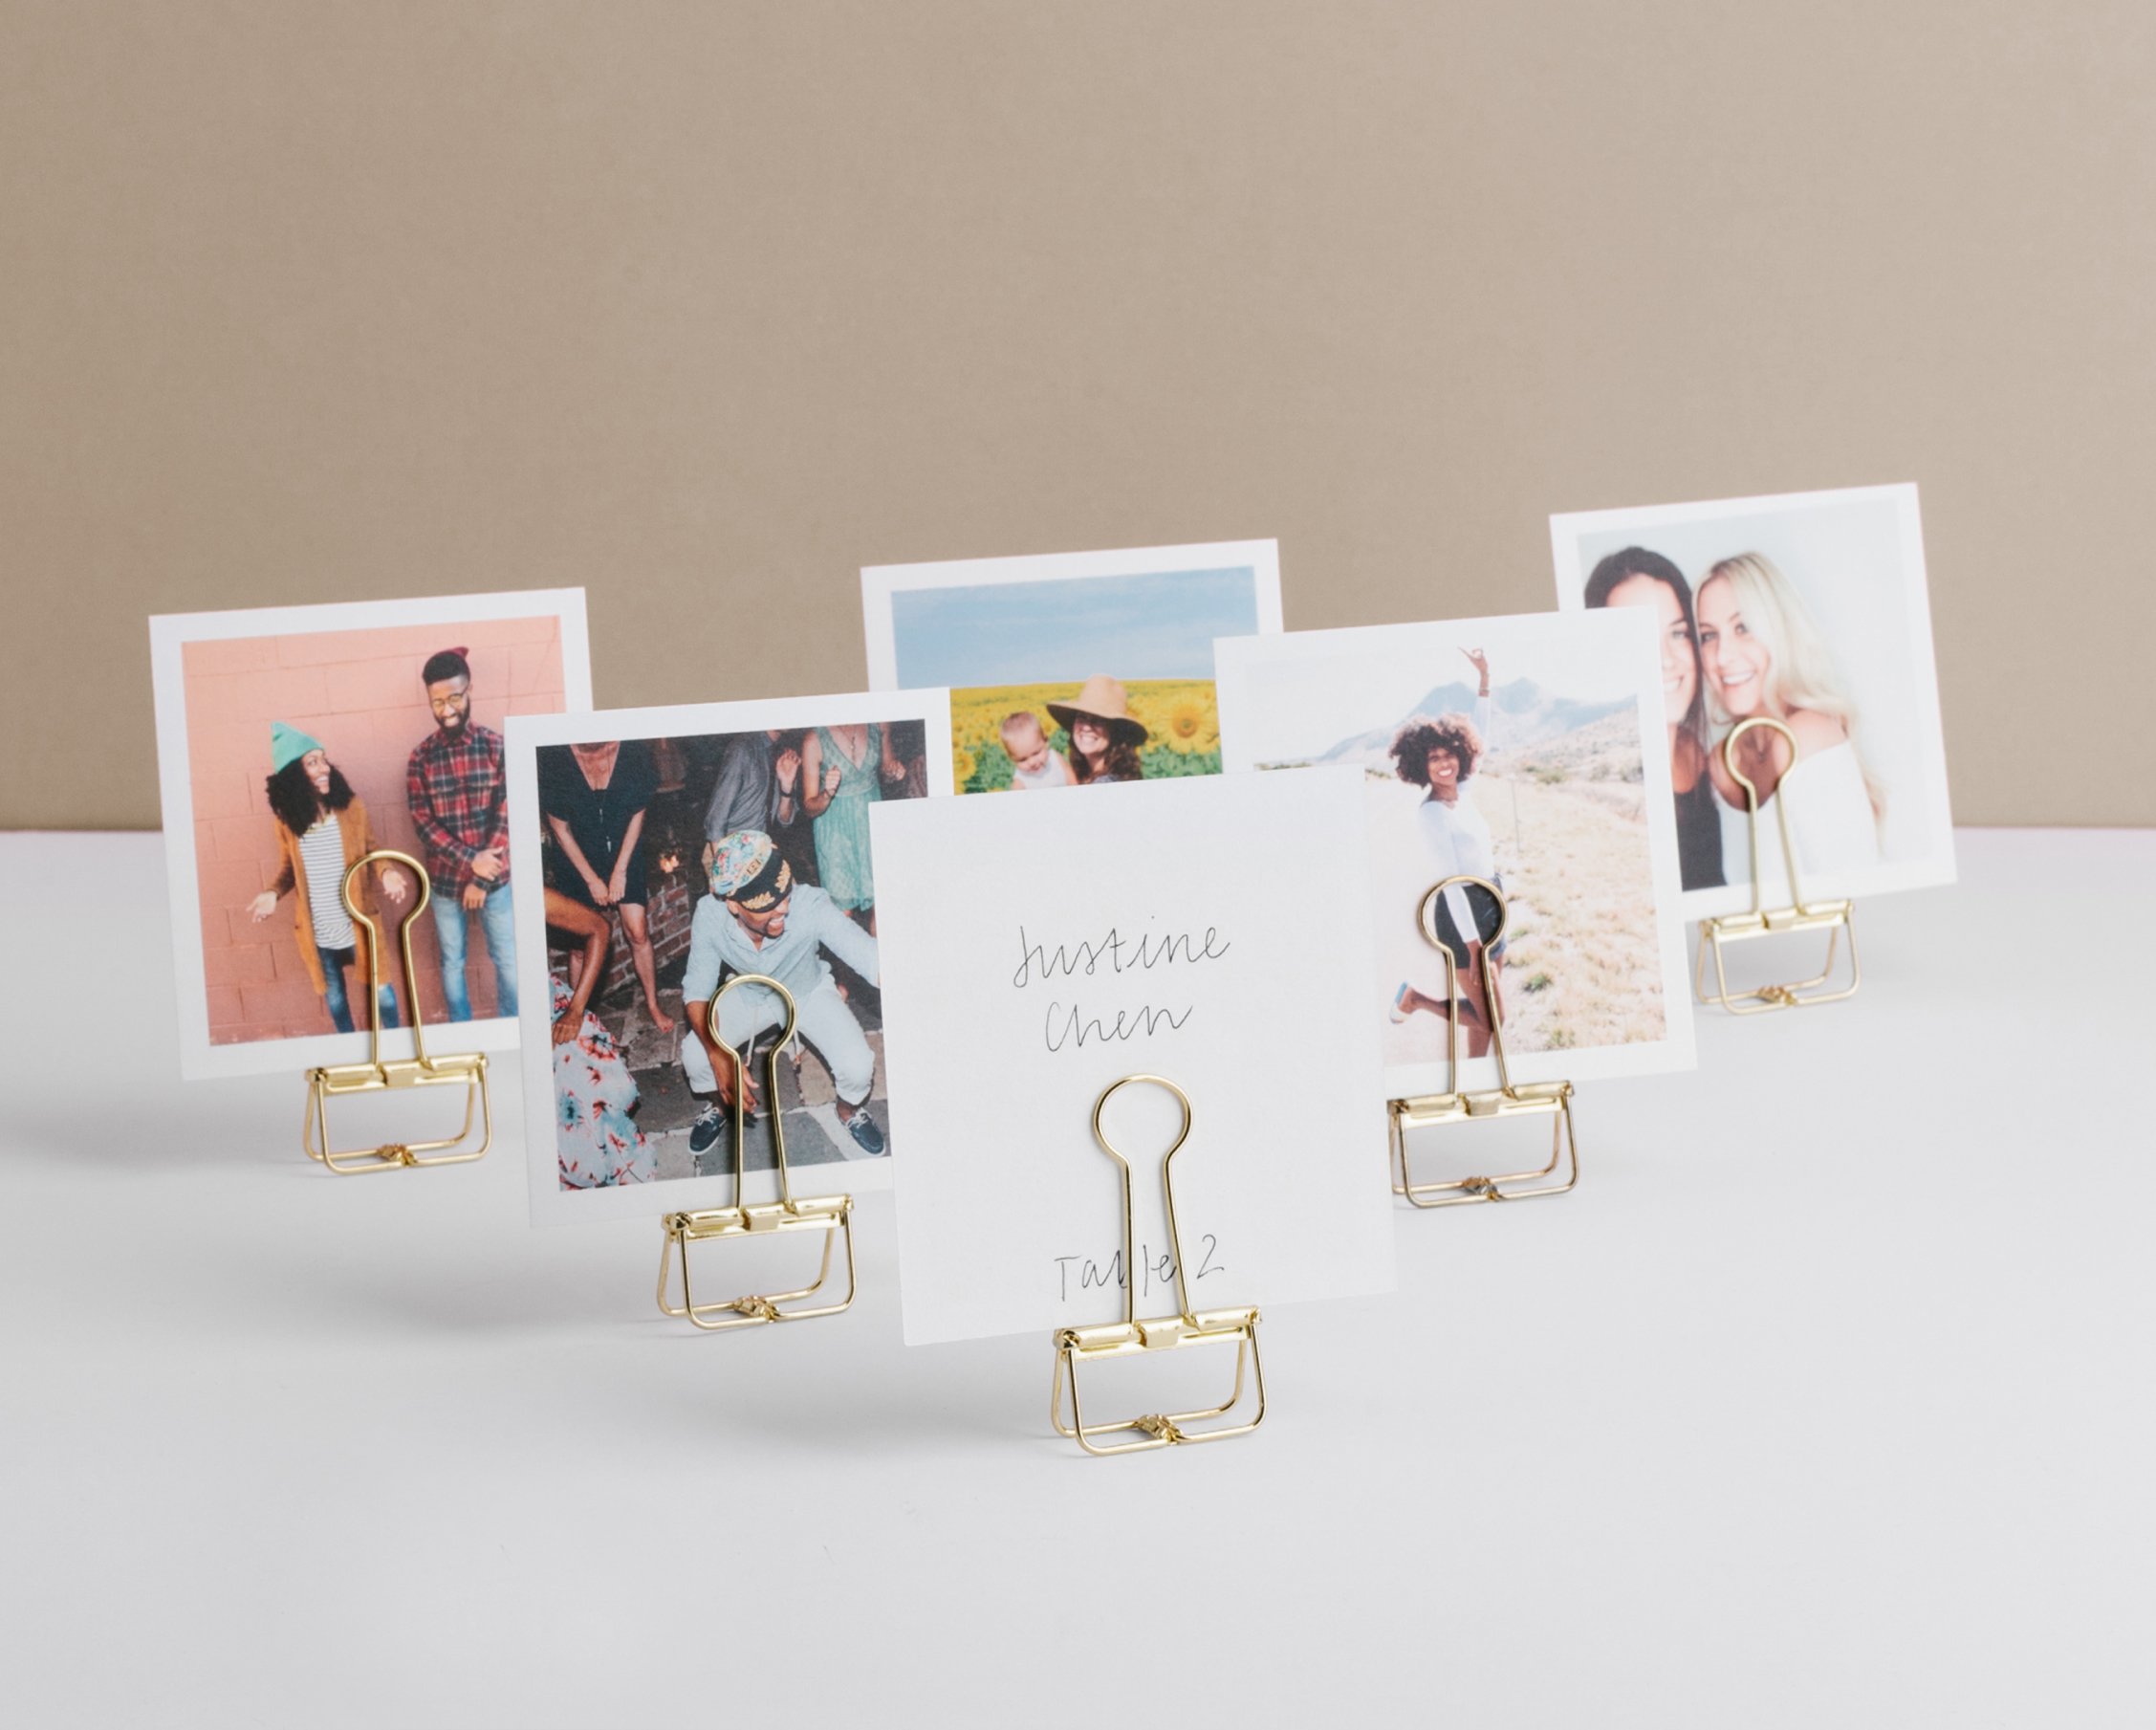 Photos of friends and family featured on Artifact Uprising Square Prints which are displayed on gold binder clips